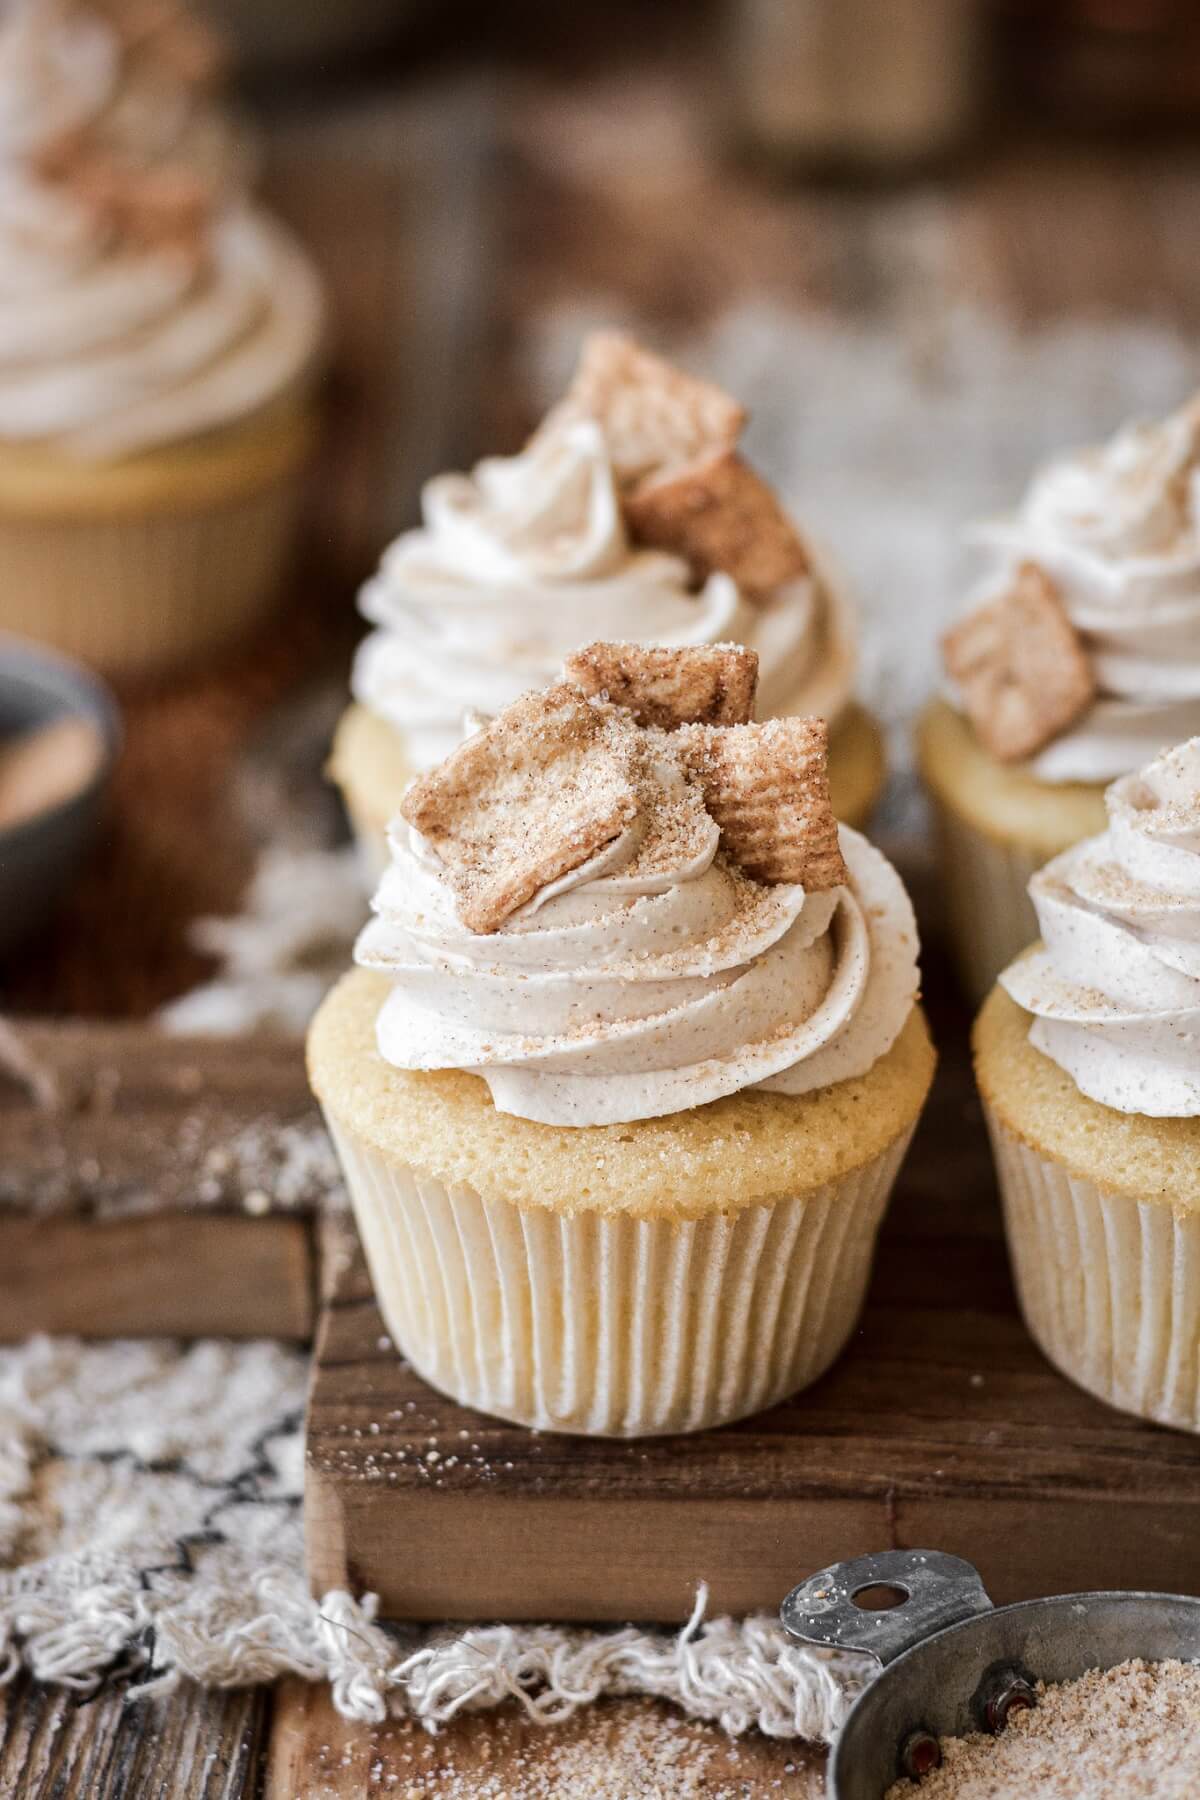 Cinnamon toast crunch cereal on top of cupcakes.